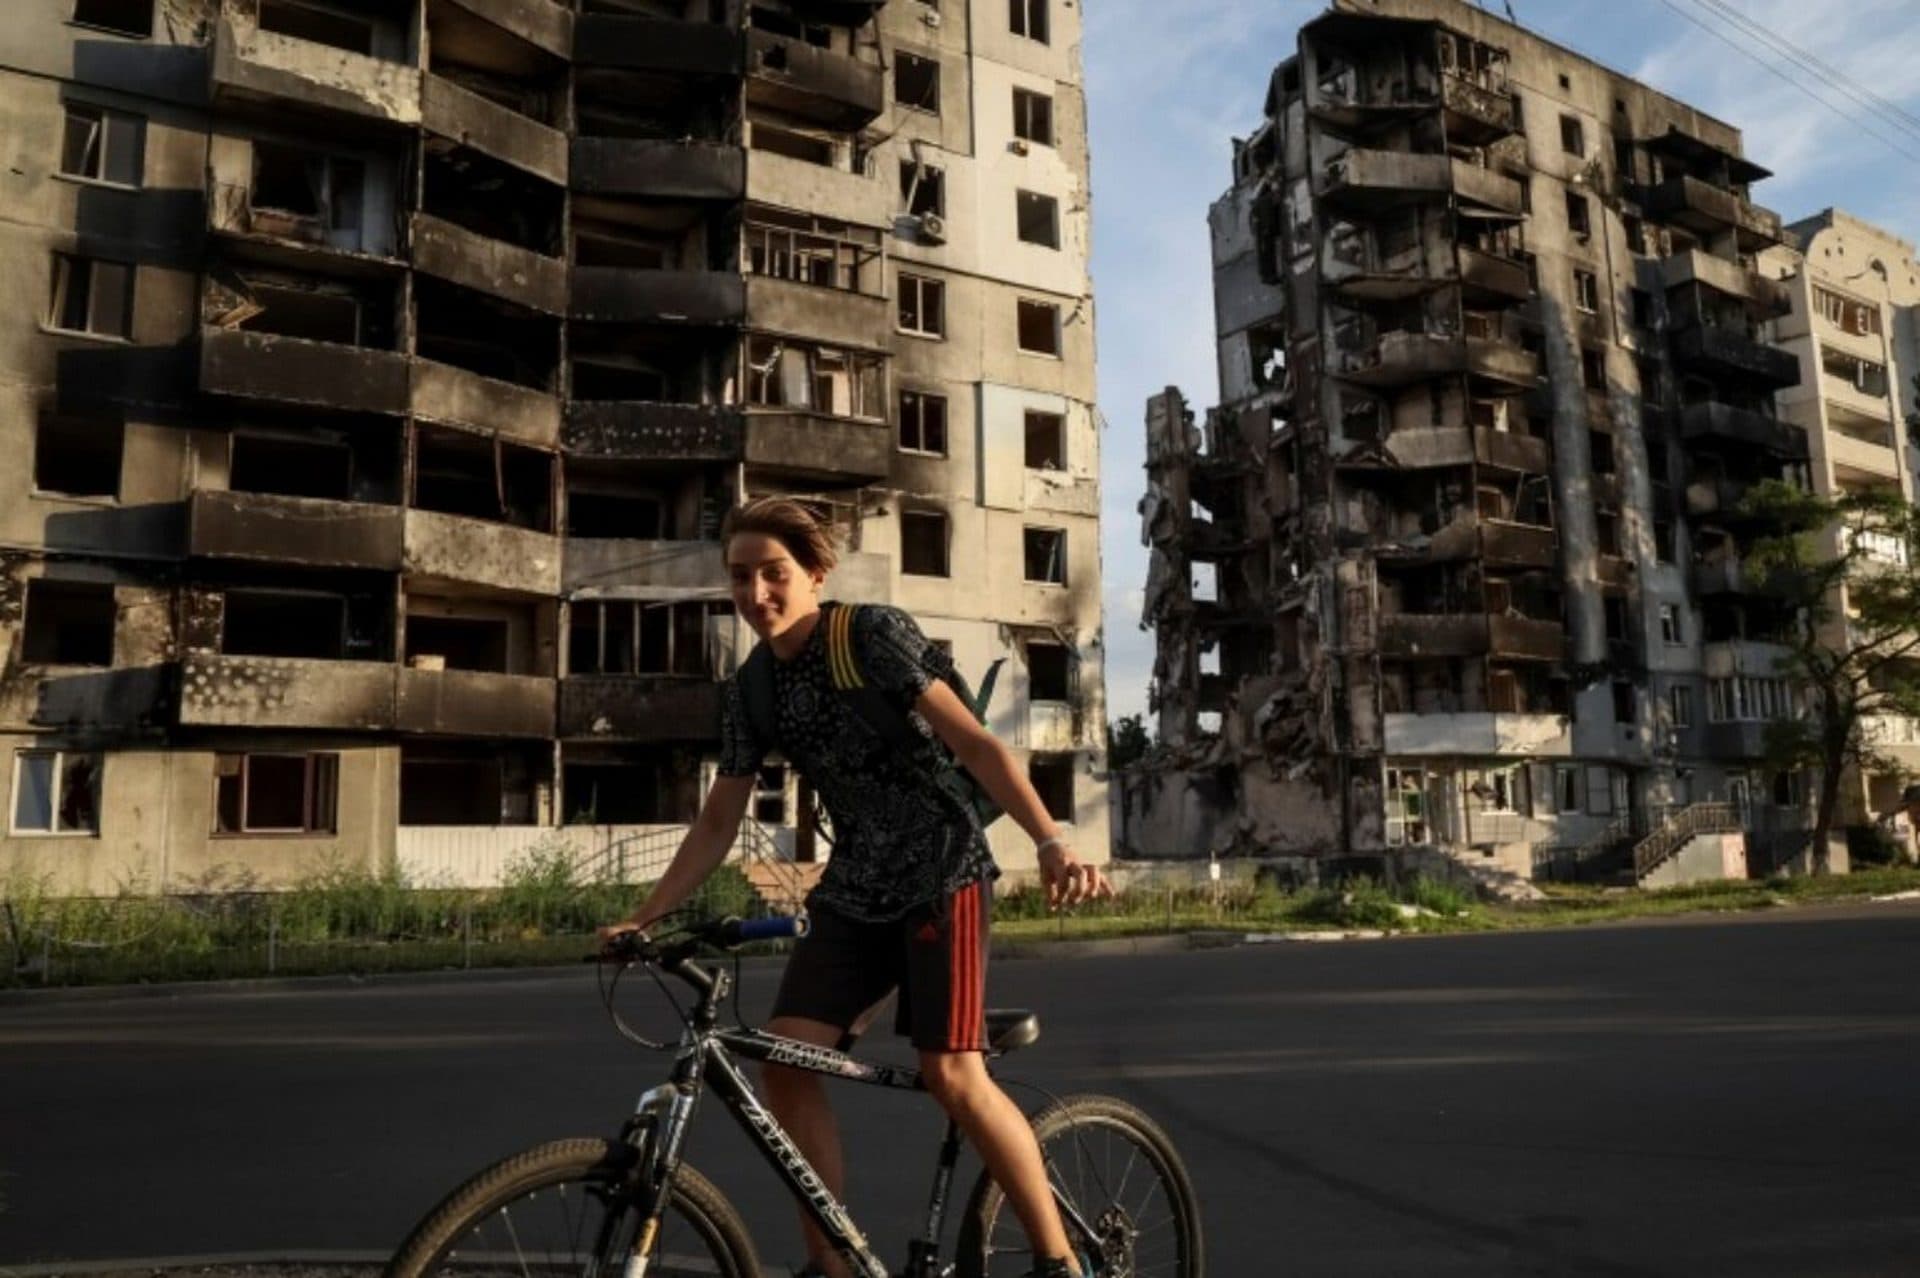 A boy cycles in front of destroyed buildings amid Russia's invasion of Ukraine, in the town of Borodyanka